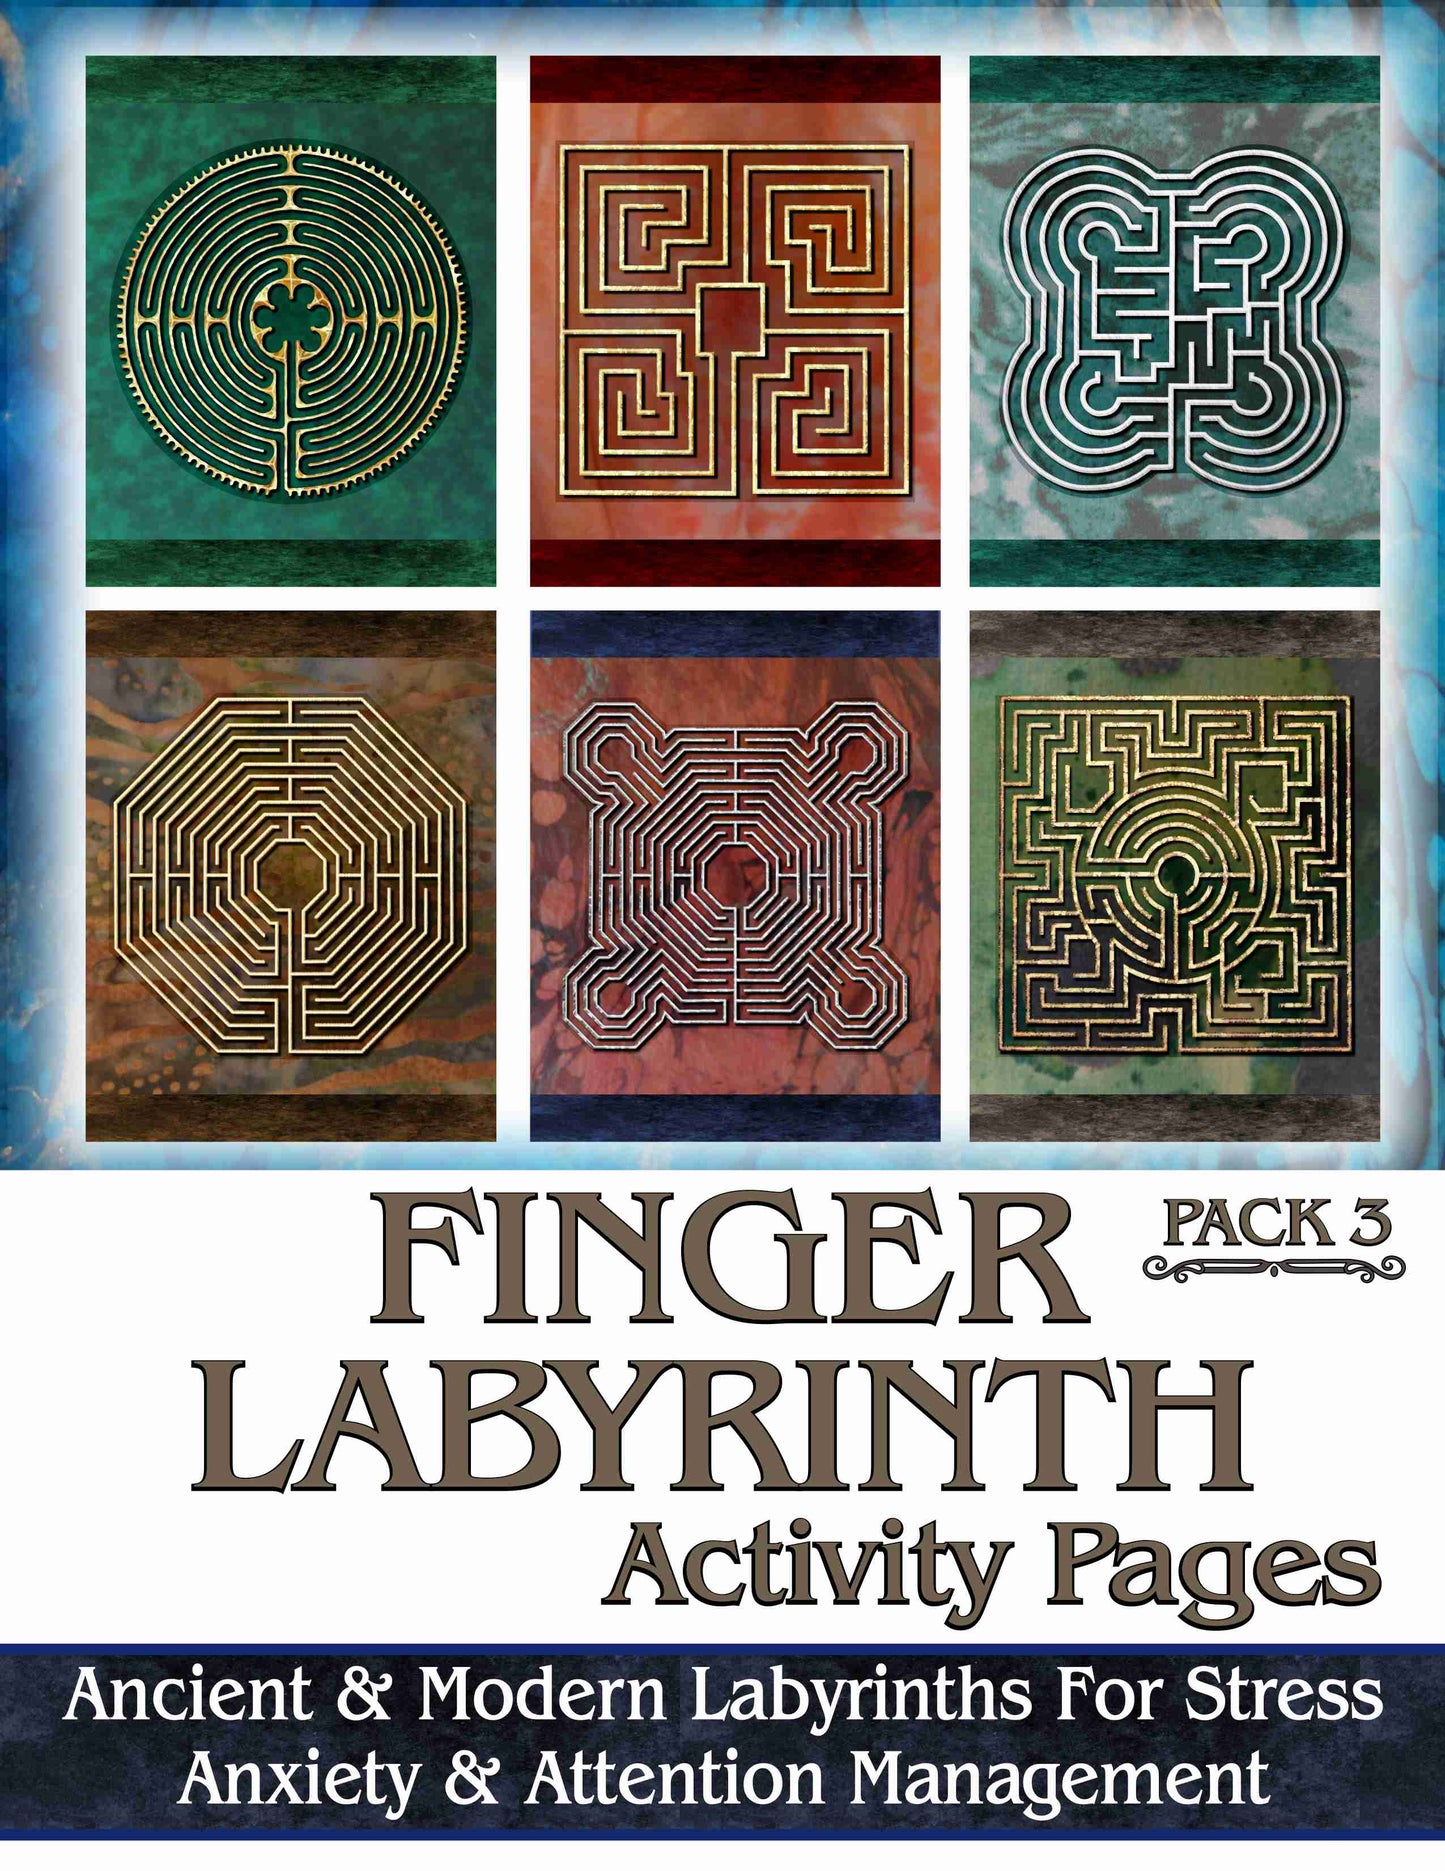 Finger Labyrinth Activity Pages Pack 3: Mindful Tracing Art